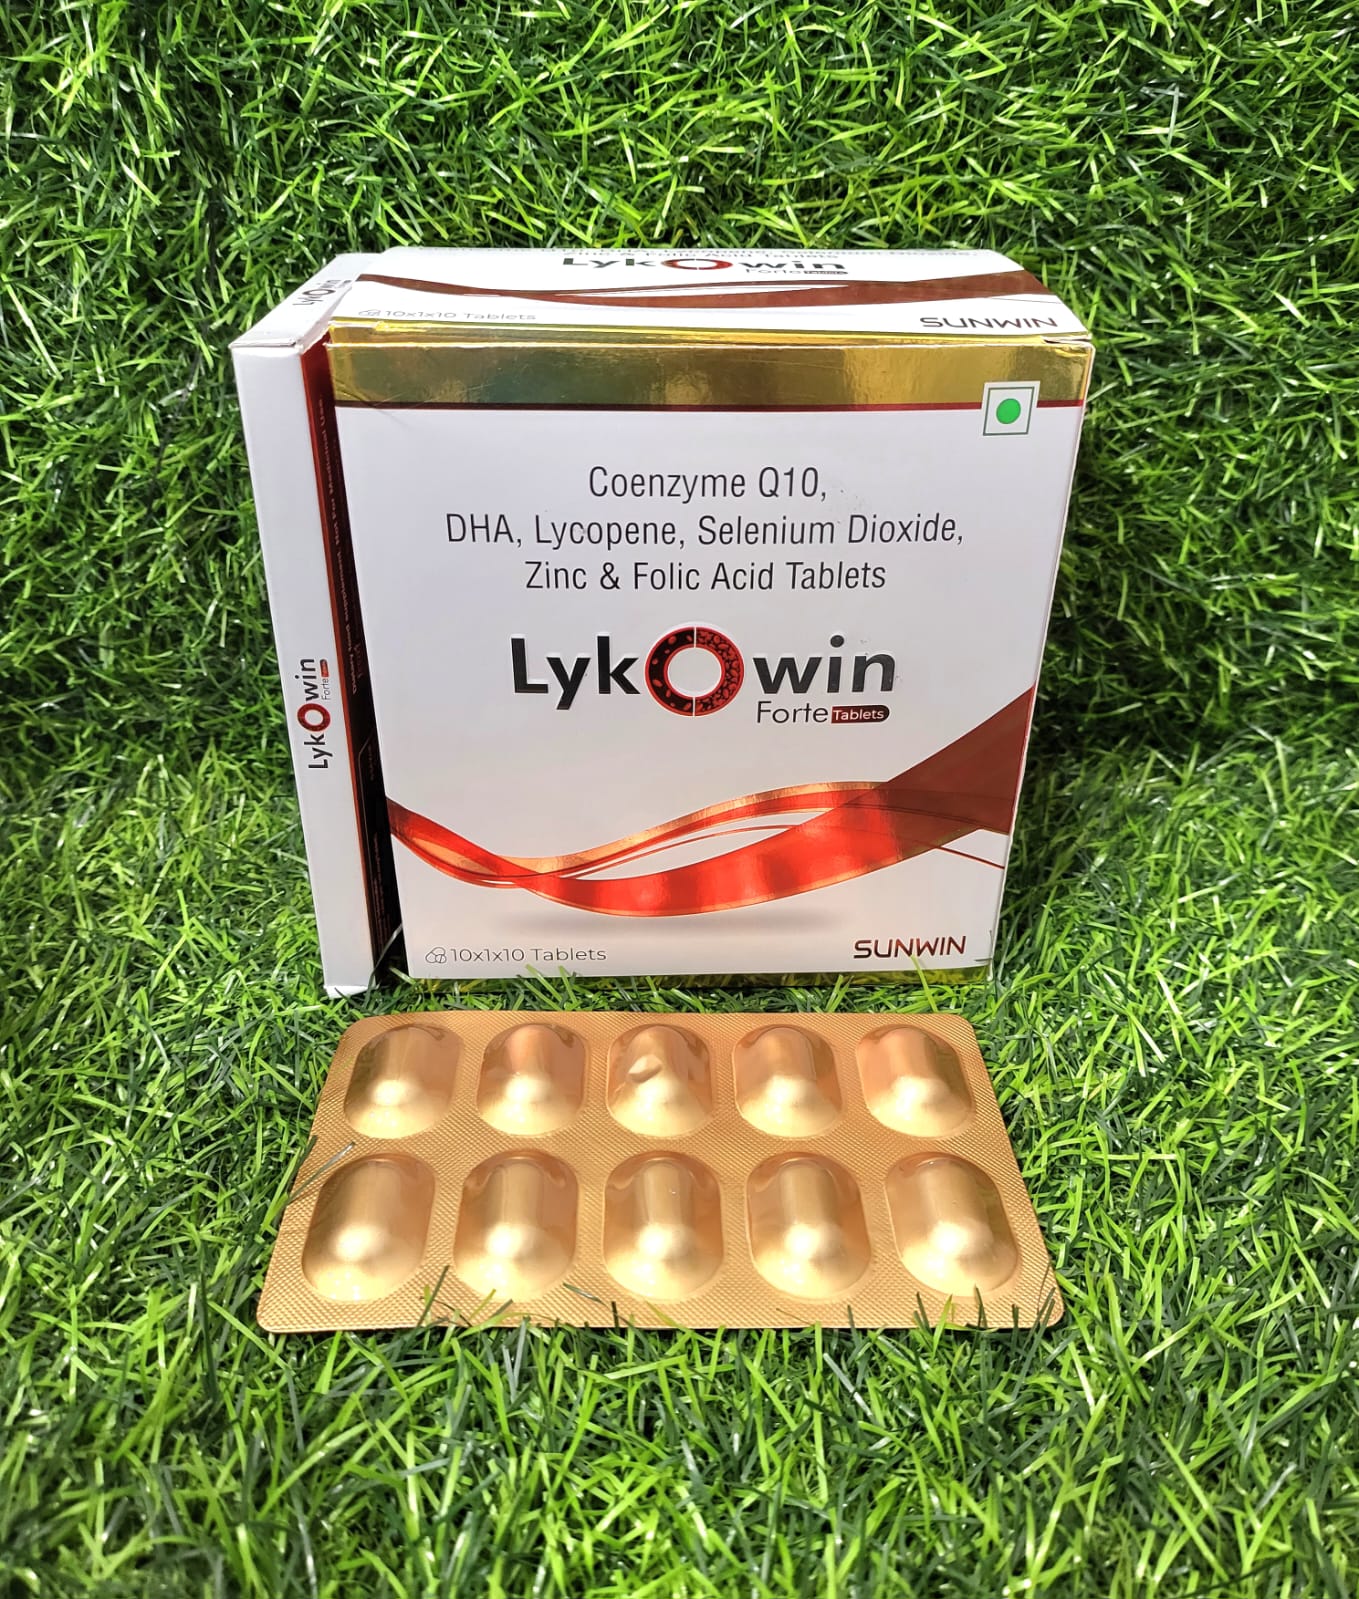 Lykowin Forte tablets